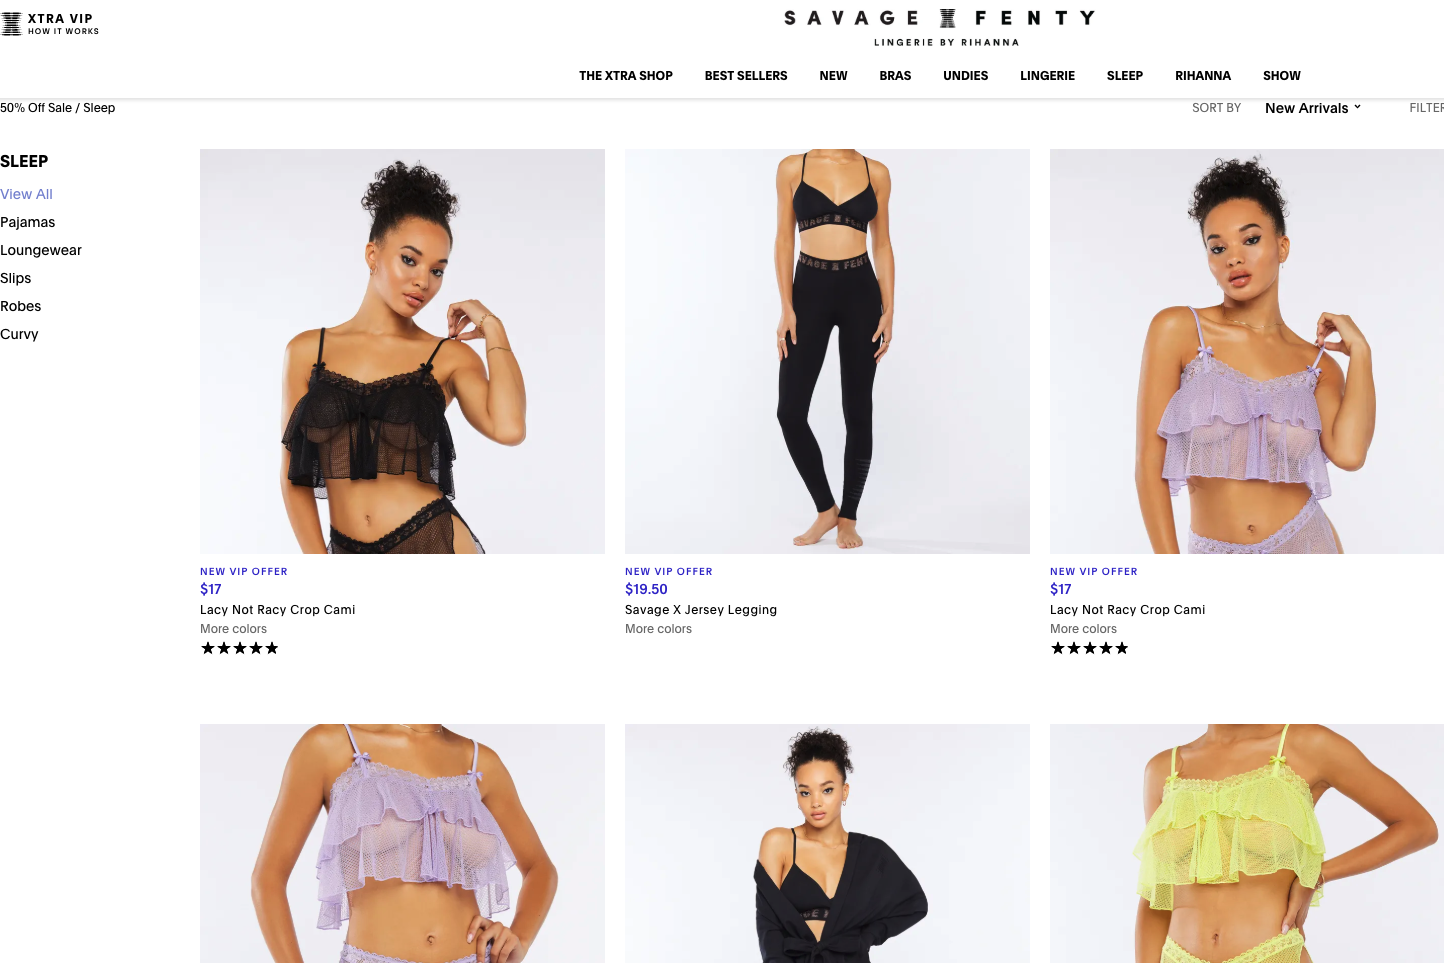 Really and truly scammed me': Rihanna's lingerie company Savage X Fenty  accused of deceptive marketing, The Independent